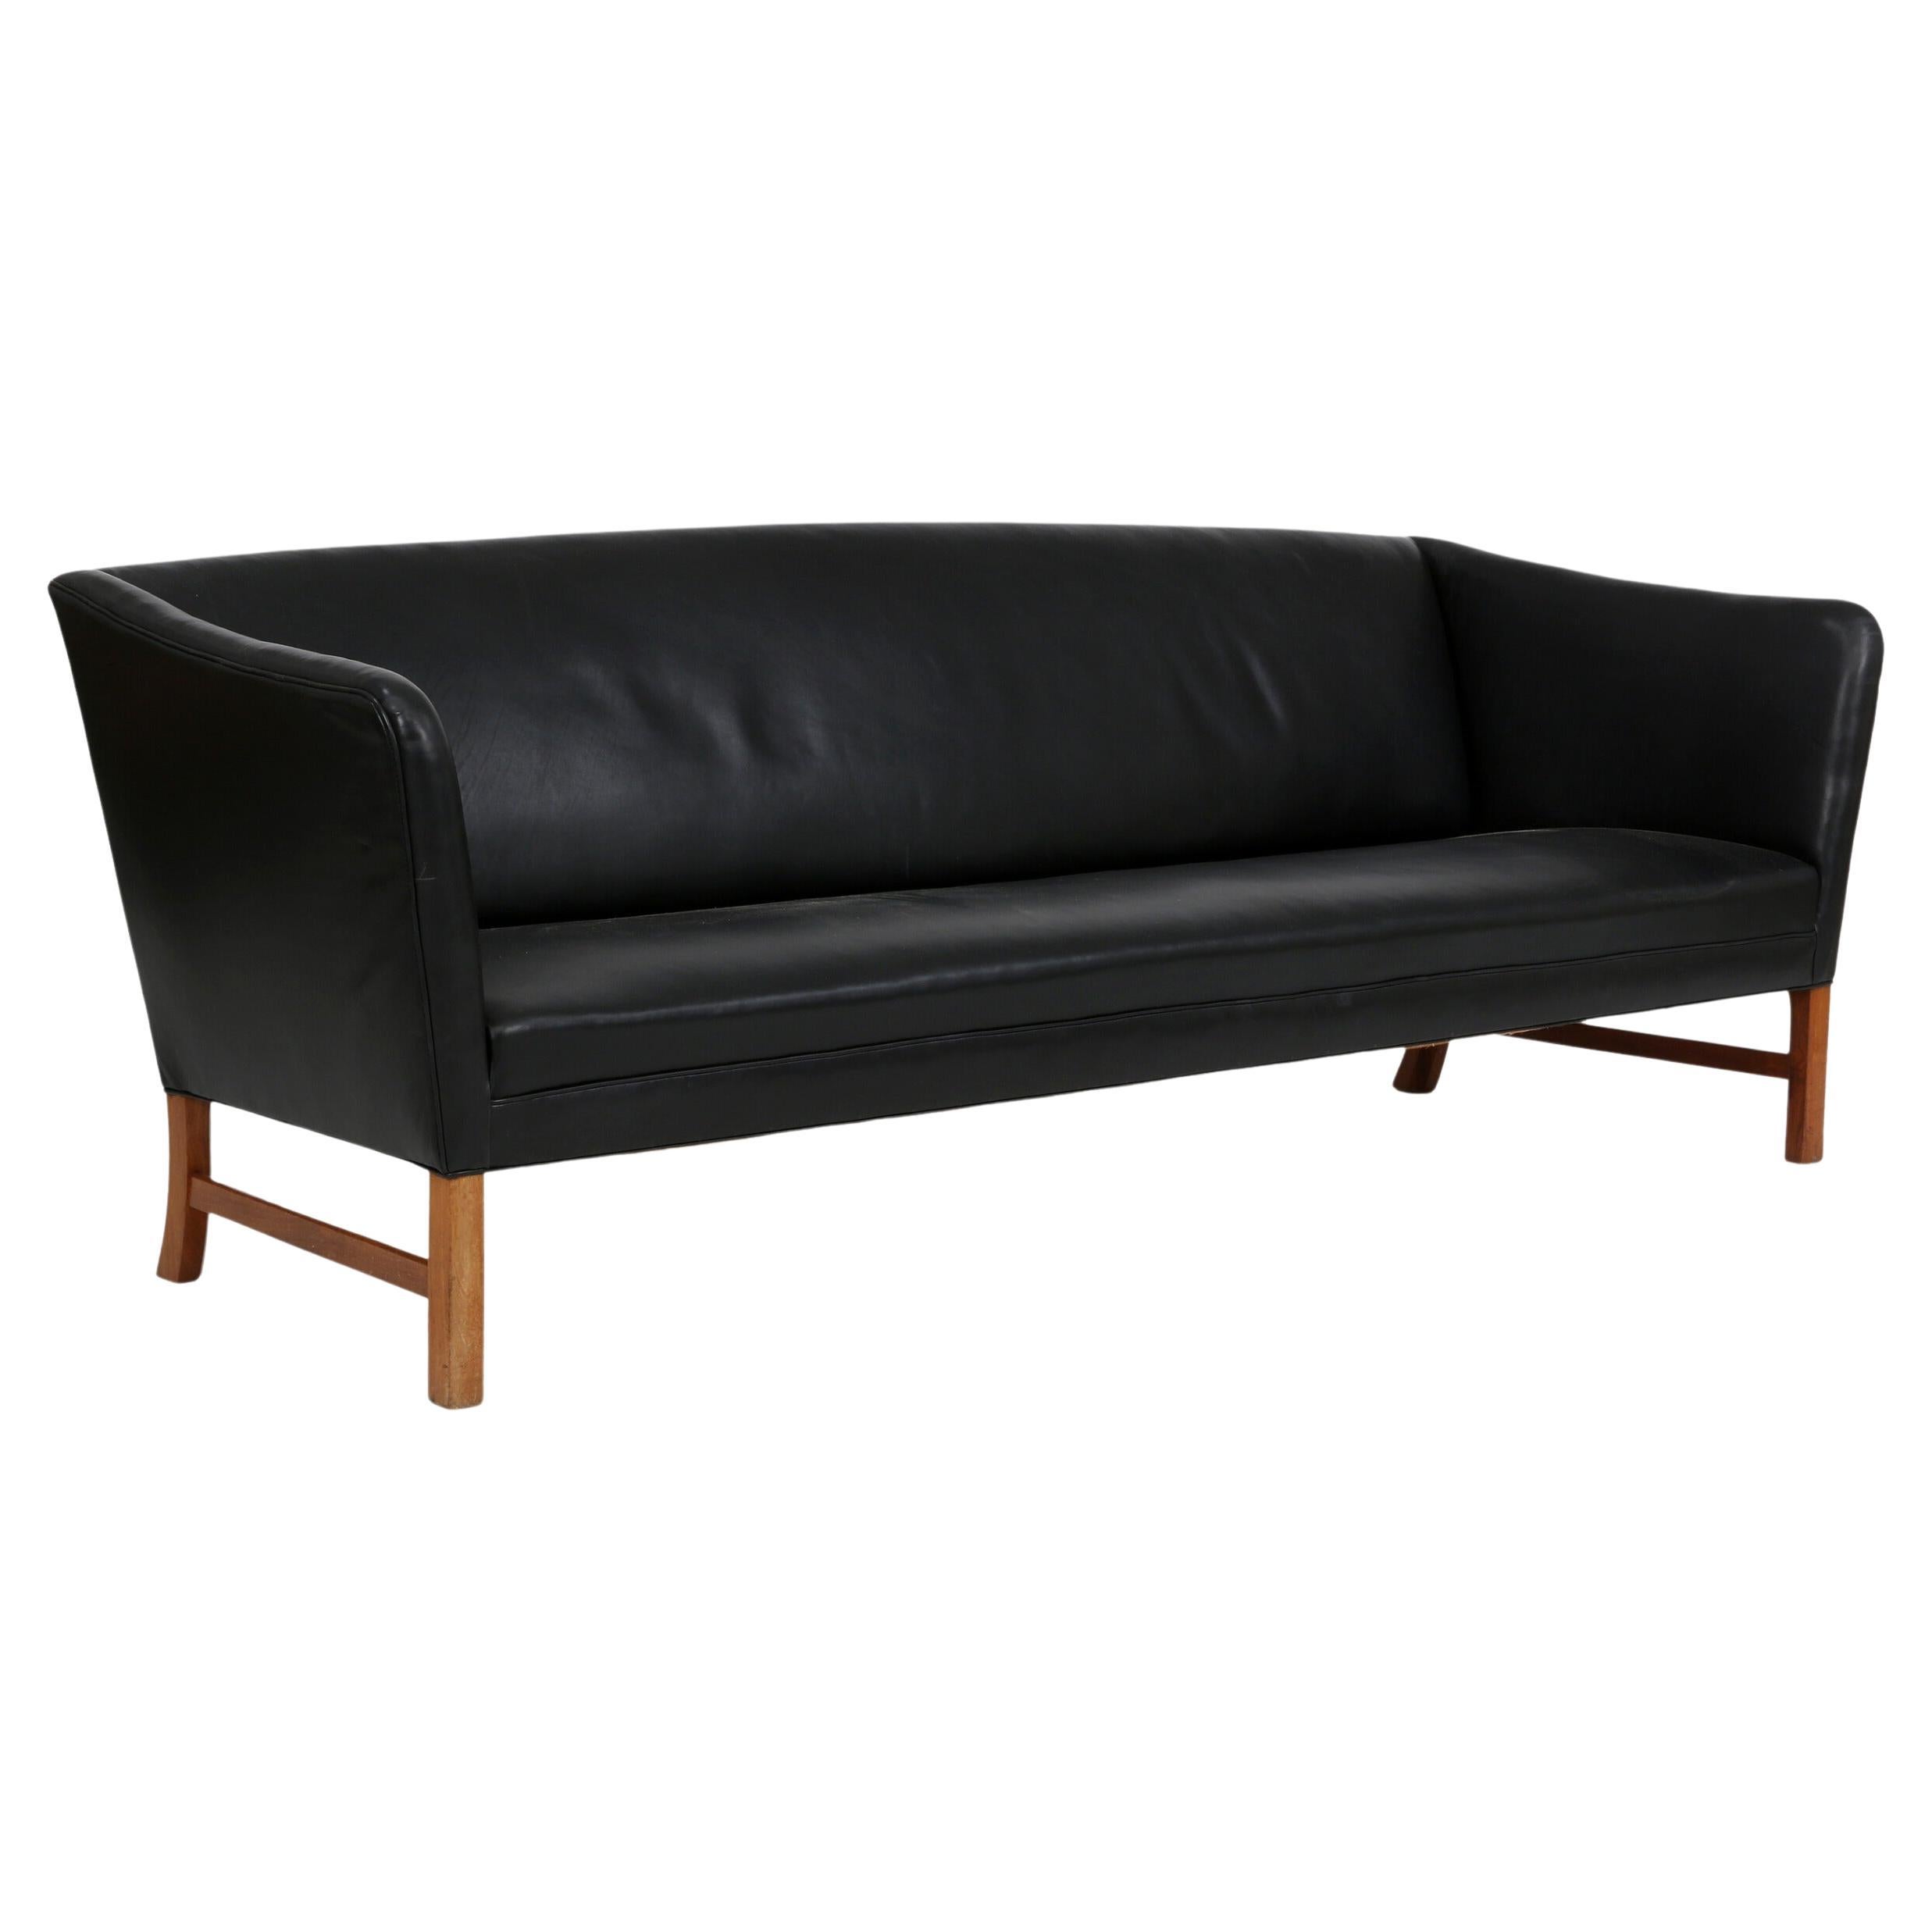 Ole Wanscher Black Leather Sofa with Mahogany Frame